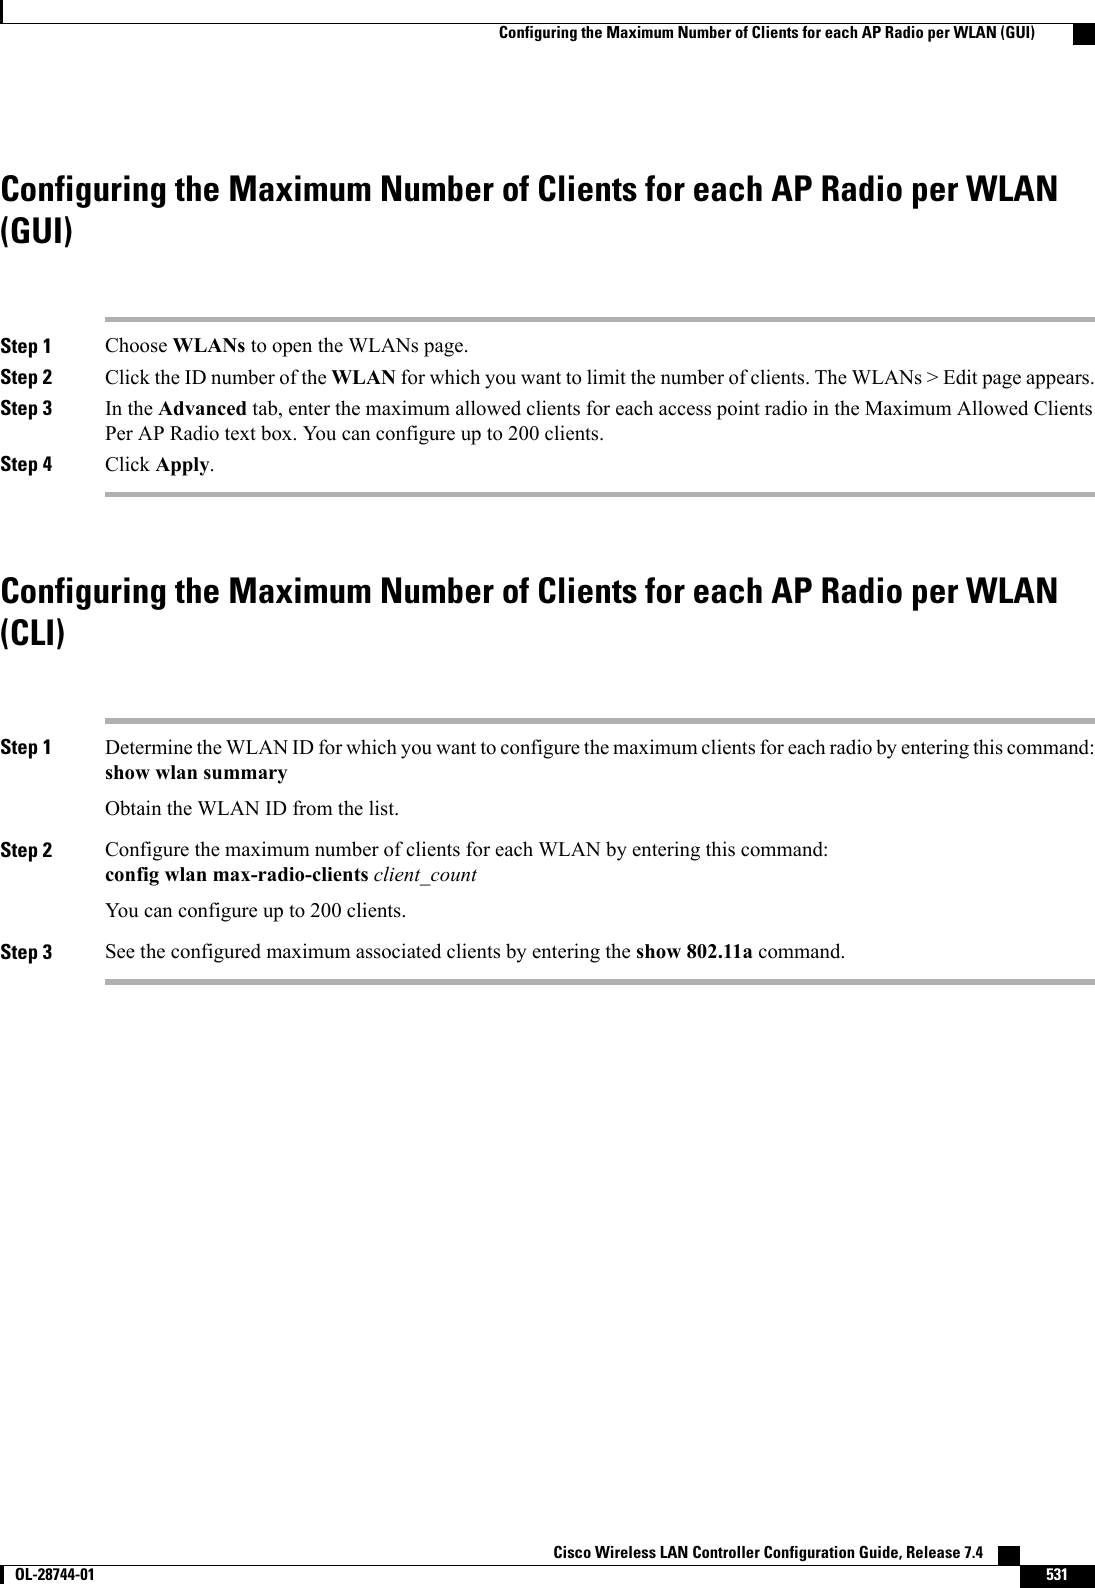 Configuring the Maximum Number of Clients for each AP Radio per WLAN(GUI)Step 1 Choose WLANs to open the WLANs page.Step 2 Click the ID number of the WLAN for which you want to limit the number of clients. The WLANs &gt; Edit page appears.Step 3 In the Advanced tab, enter the maximum allowed clients for each access point radio in the Maximum Allowed ClientsPer AP Radio text box. You can configure up to 200 clients.Step 4 Click Apply.Configuring the Maximum Number of Clients for each AP Radio per WLAN(CLI)Step 1 Determine the WLAN ID for which you want to configure the maximum clients for each radio by entering this command:show wlan summaryObtain the WLAN ID from the list.Step 2 Configure the maximum number of clients for each WLAN by entering this command:config wlan max-radio-clients client_countYou can configure up to 200 clients.Step 3 See the configured maximum associated clients by entering the show 802.11a command.Cisco Wireless LAN Controller Configuration Guide, Release 7.4       OL-28744-01 531Configuring the Maximum Number of Clients for each AP Radio per WLAN (GUI)